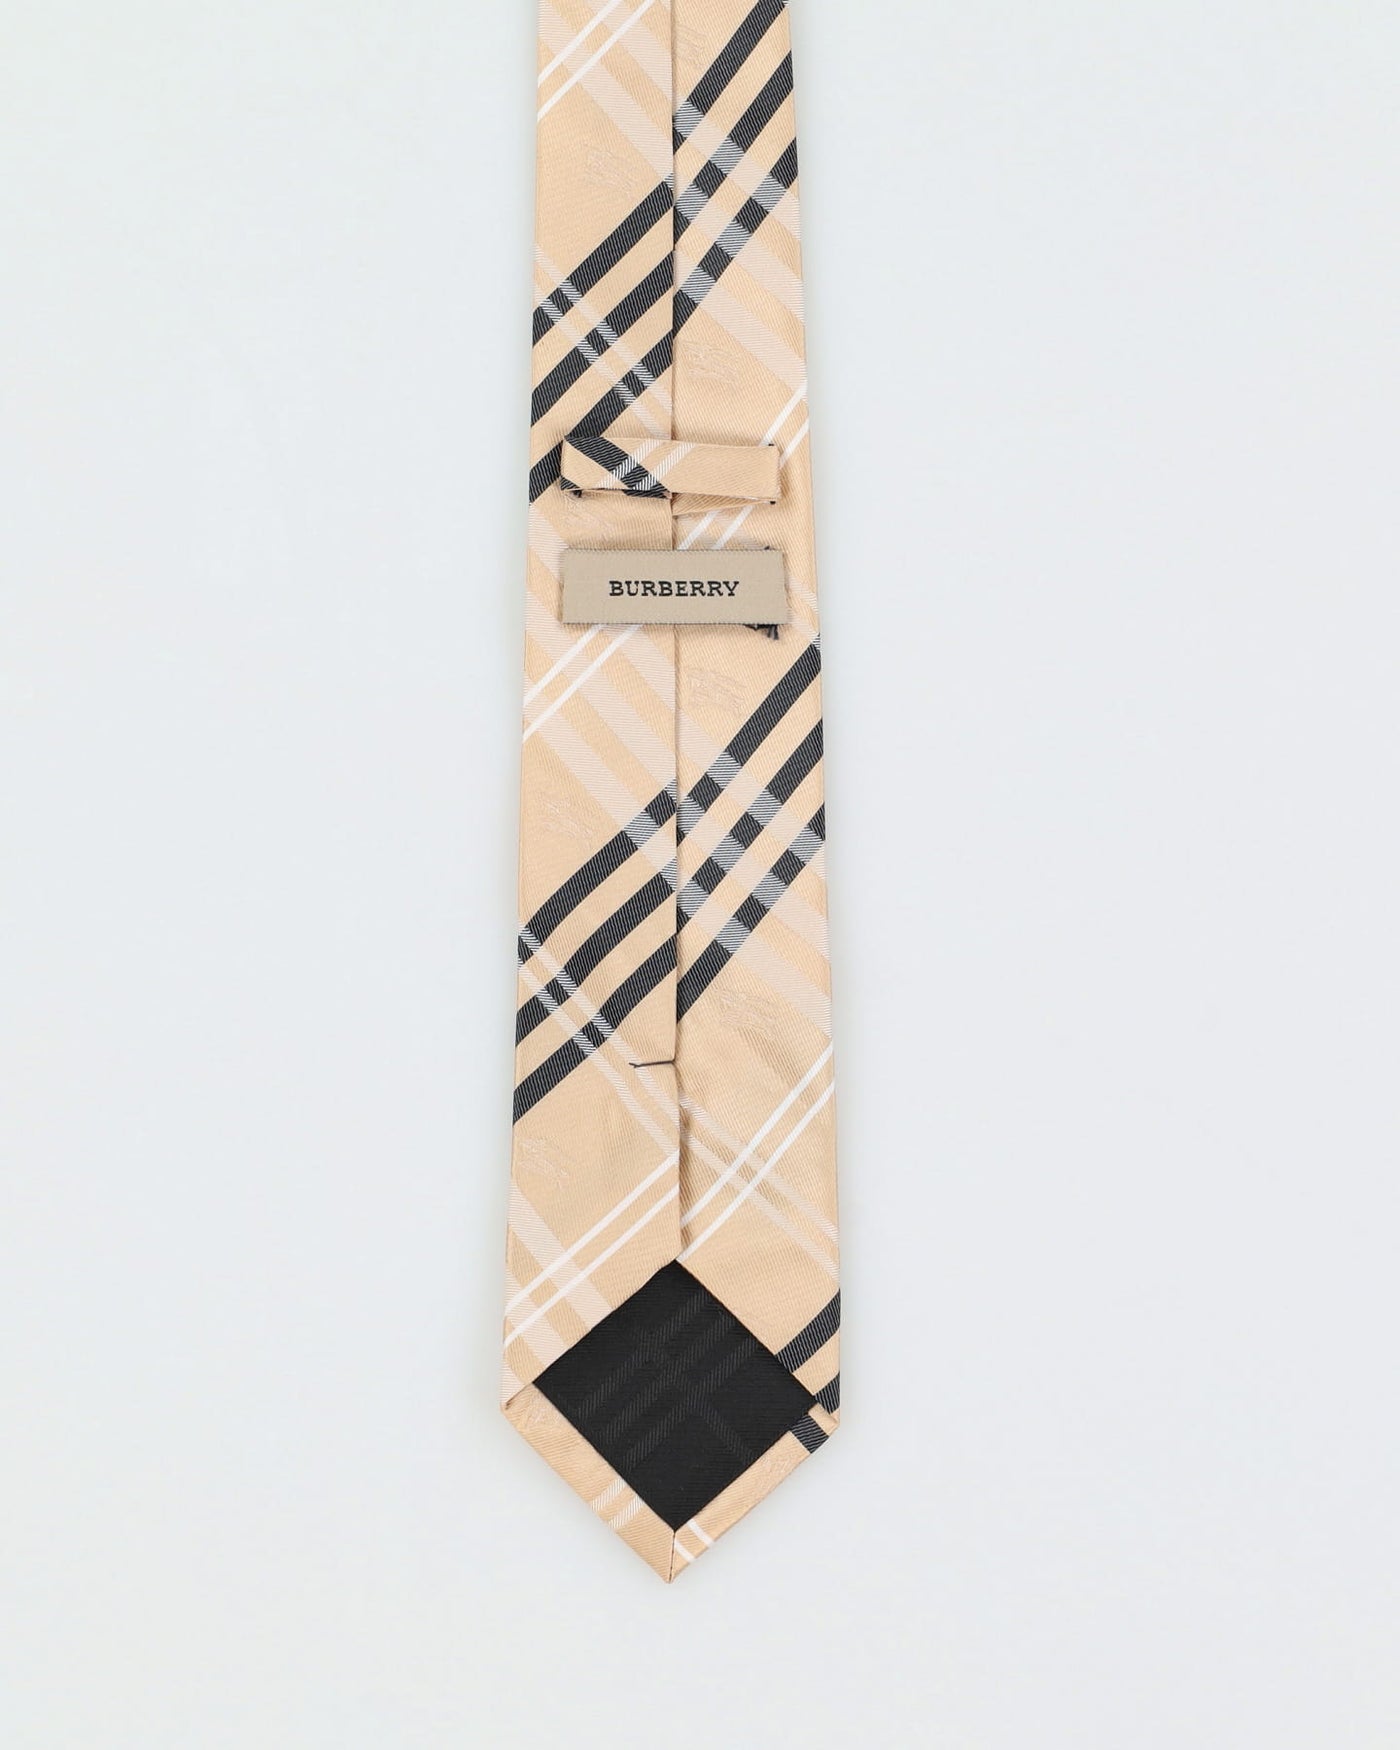 Vintage 90s Burberry Beige Check Patterned Tie